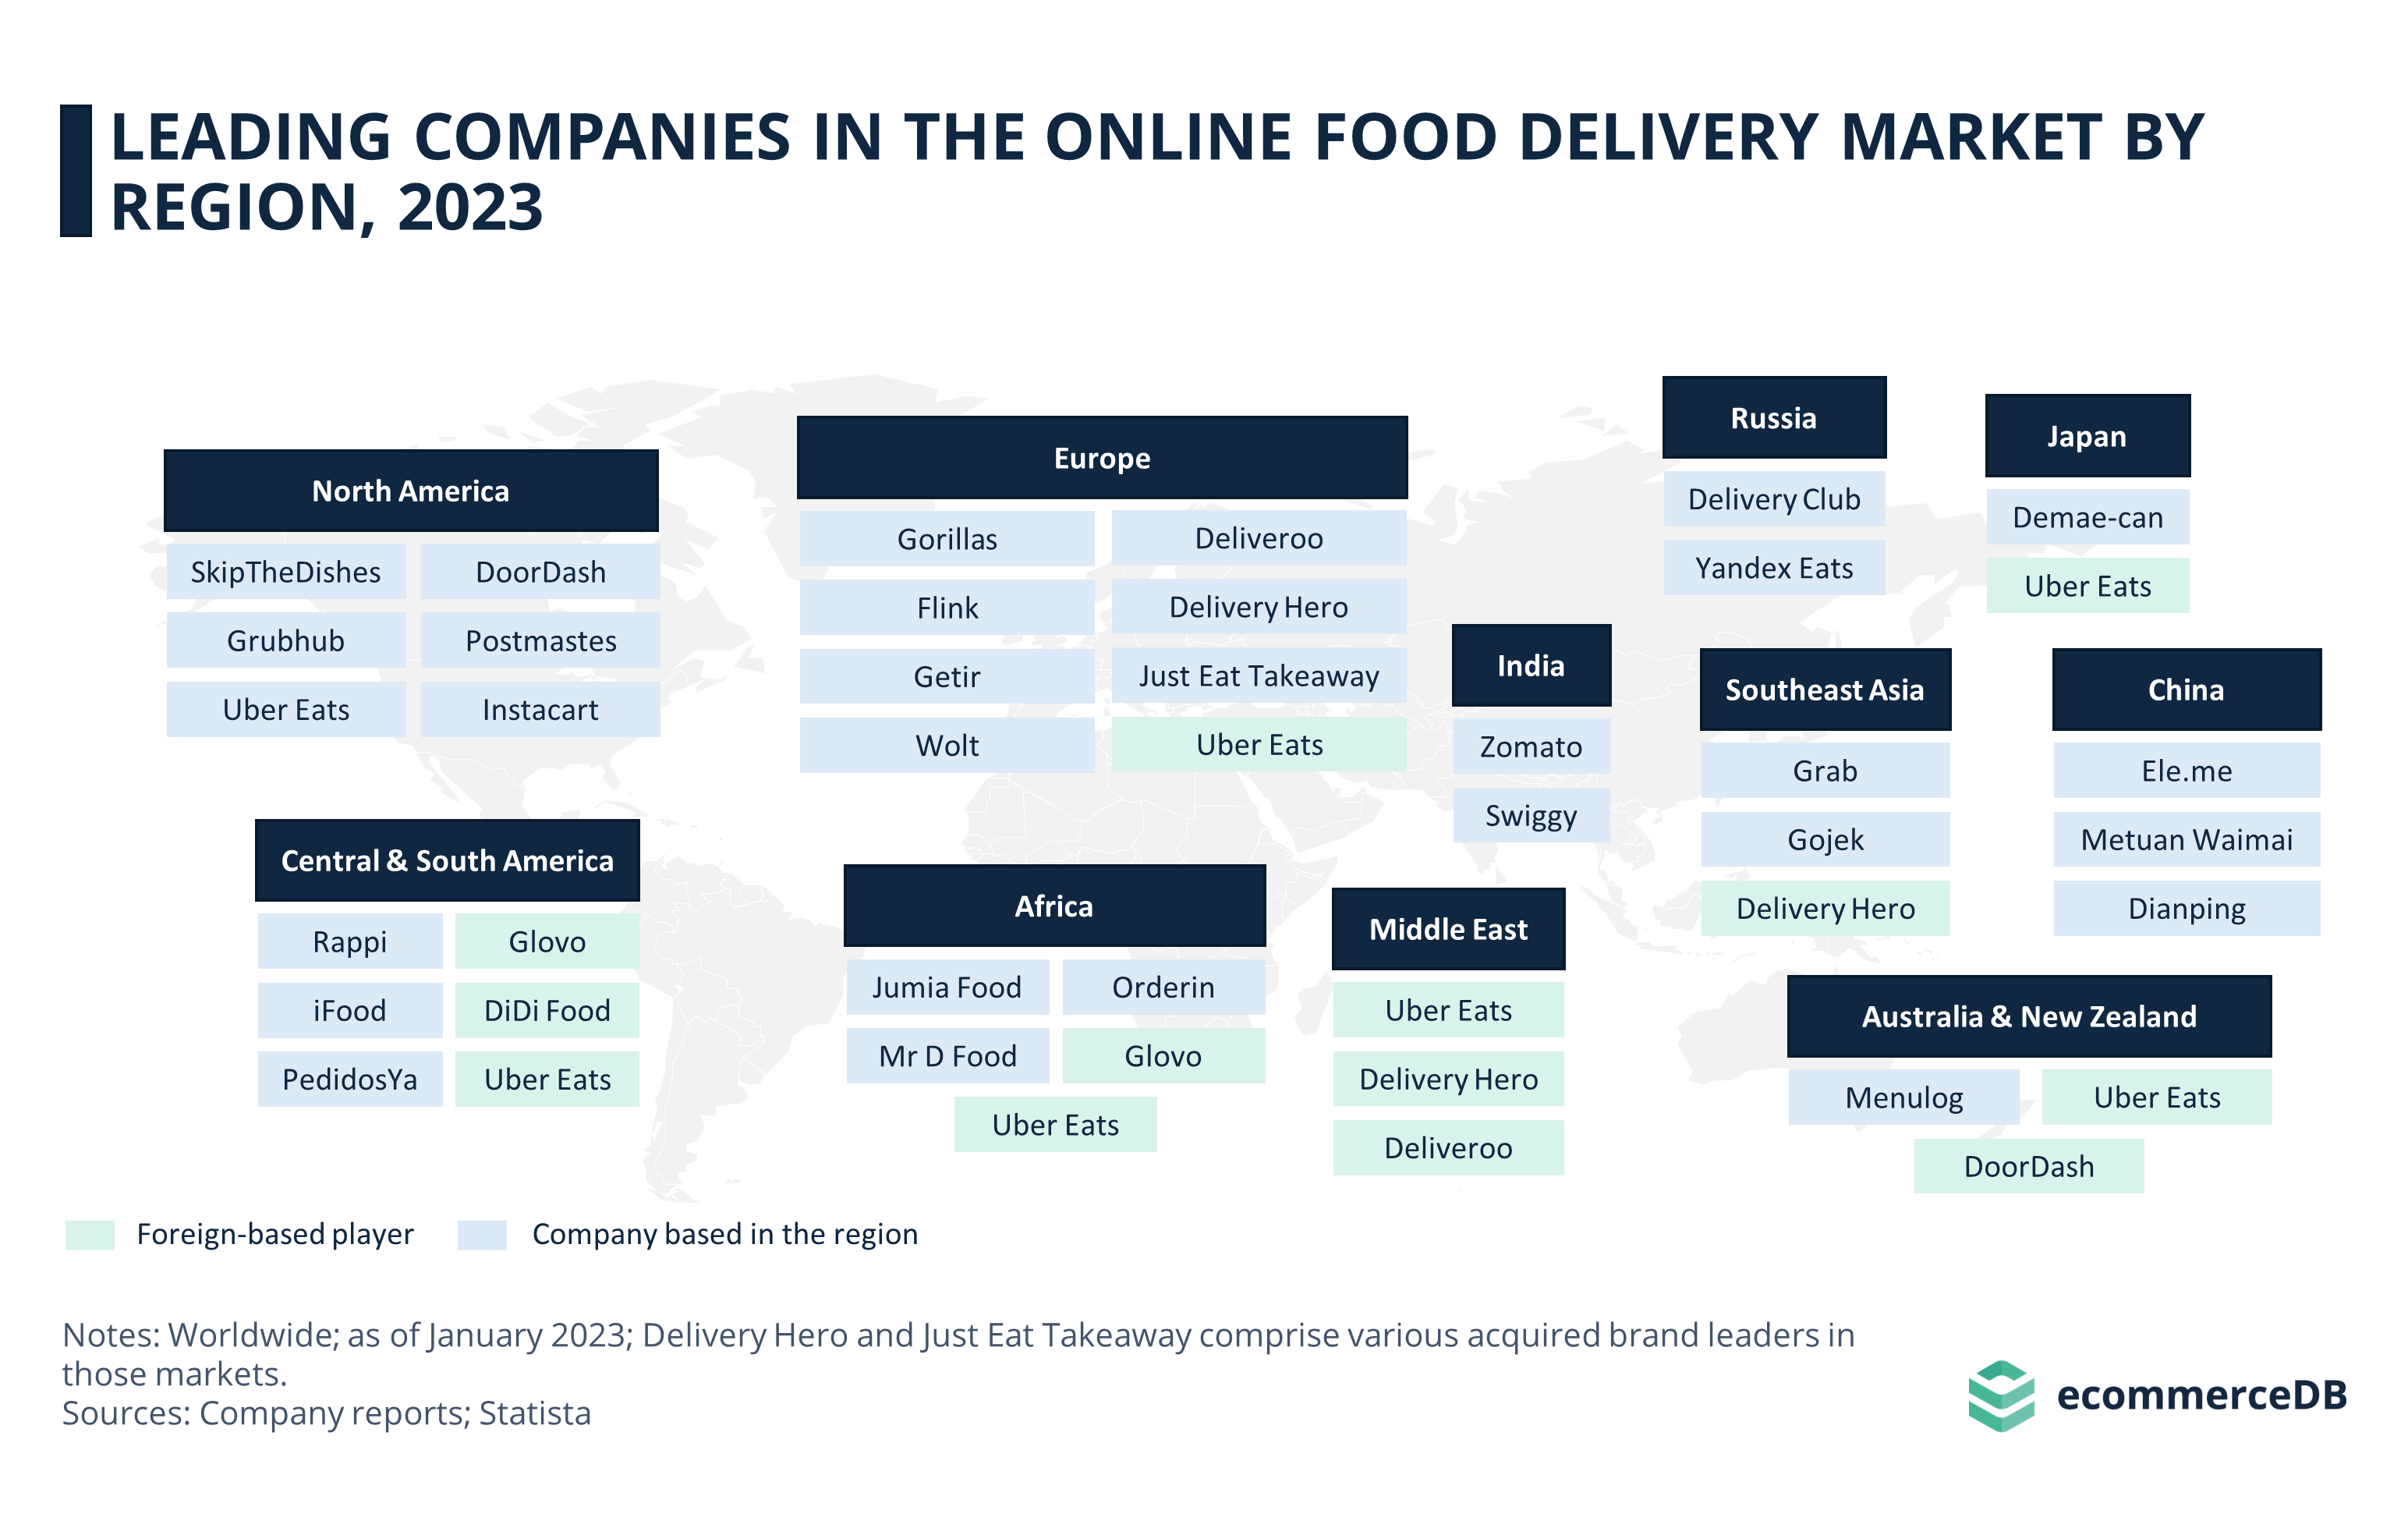 Leading companies in the online food delivery market1